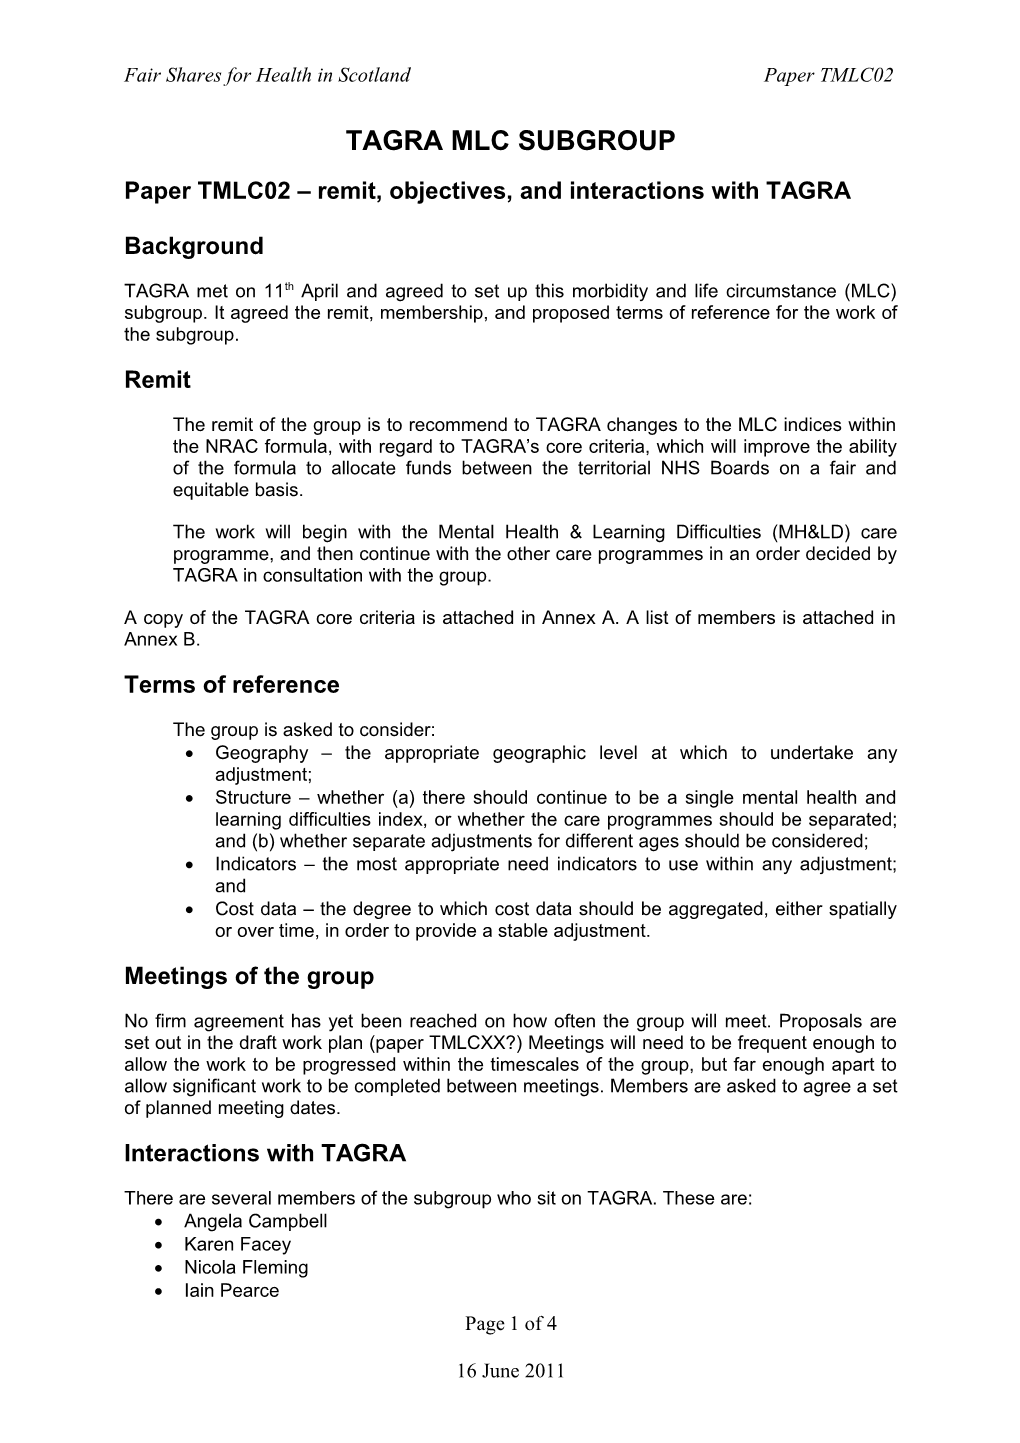 TAGRA Remote and Rural Group Remit, Objectives, and Interactions with TAGRA